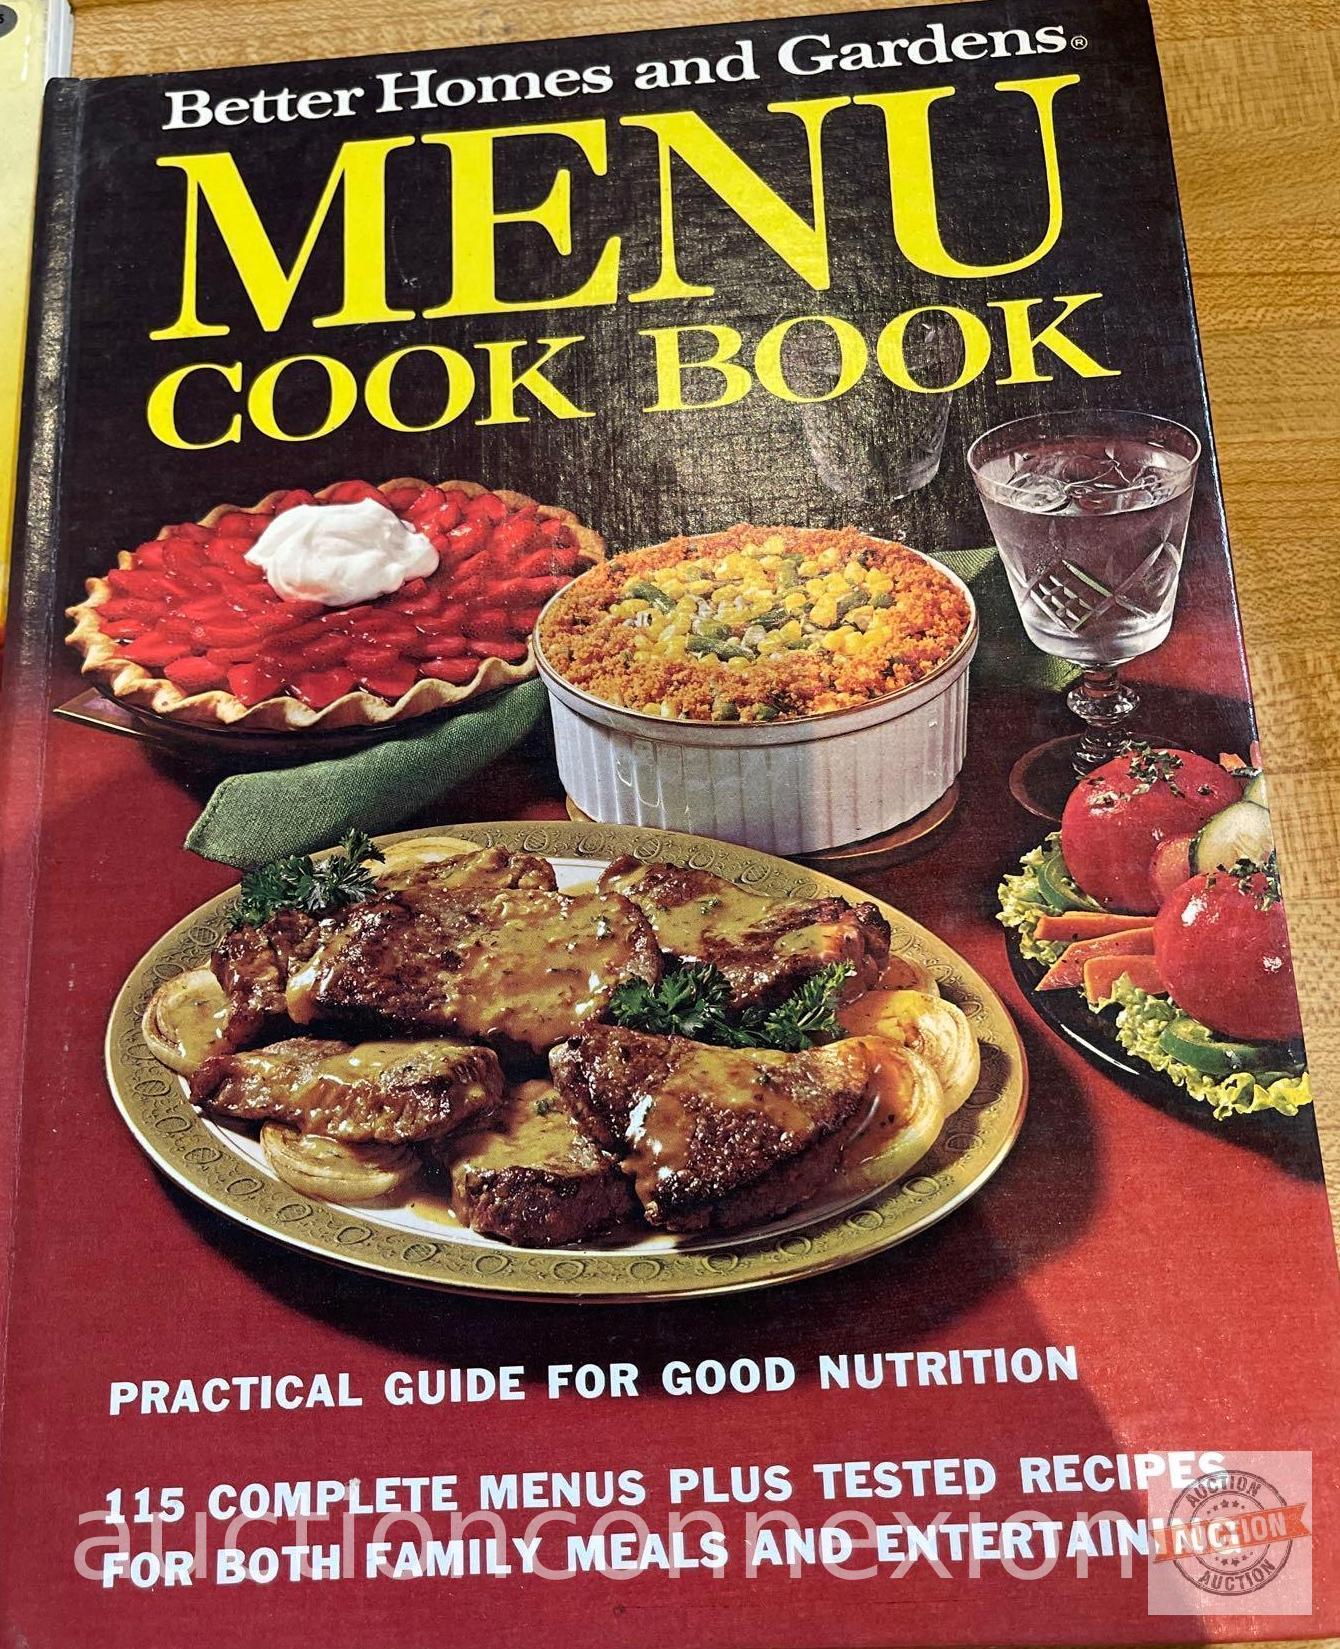 Books - Vintage Cookbooks - 9 from the 1970's-1980's